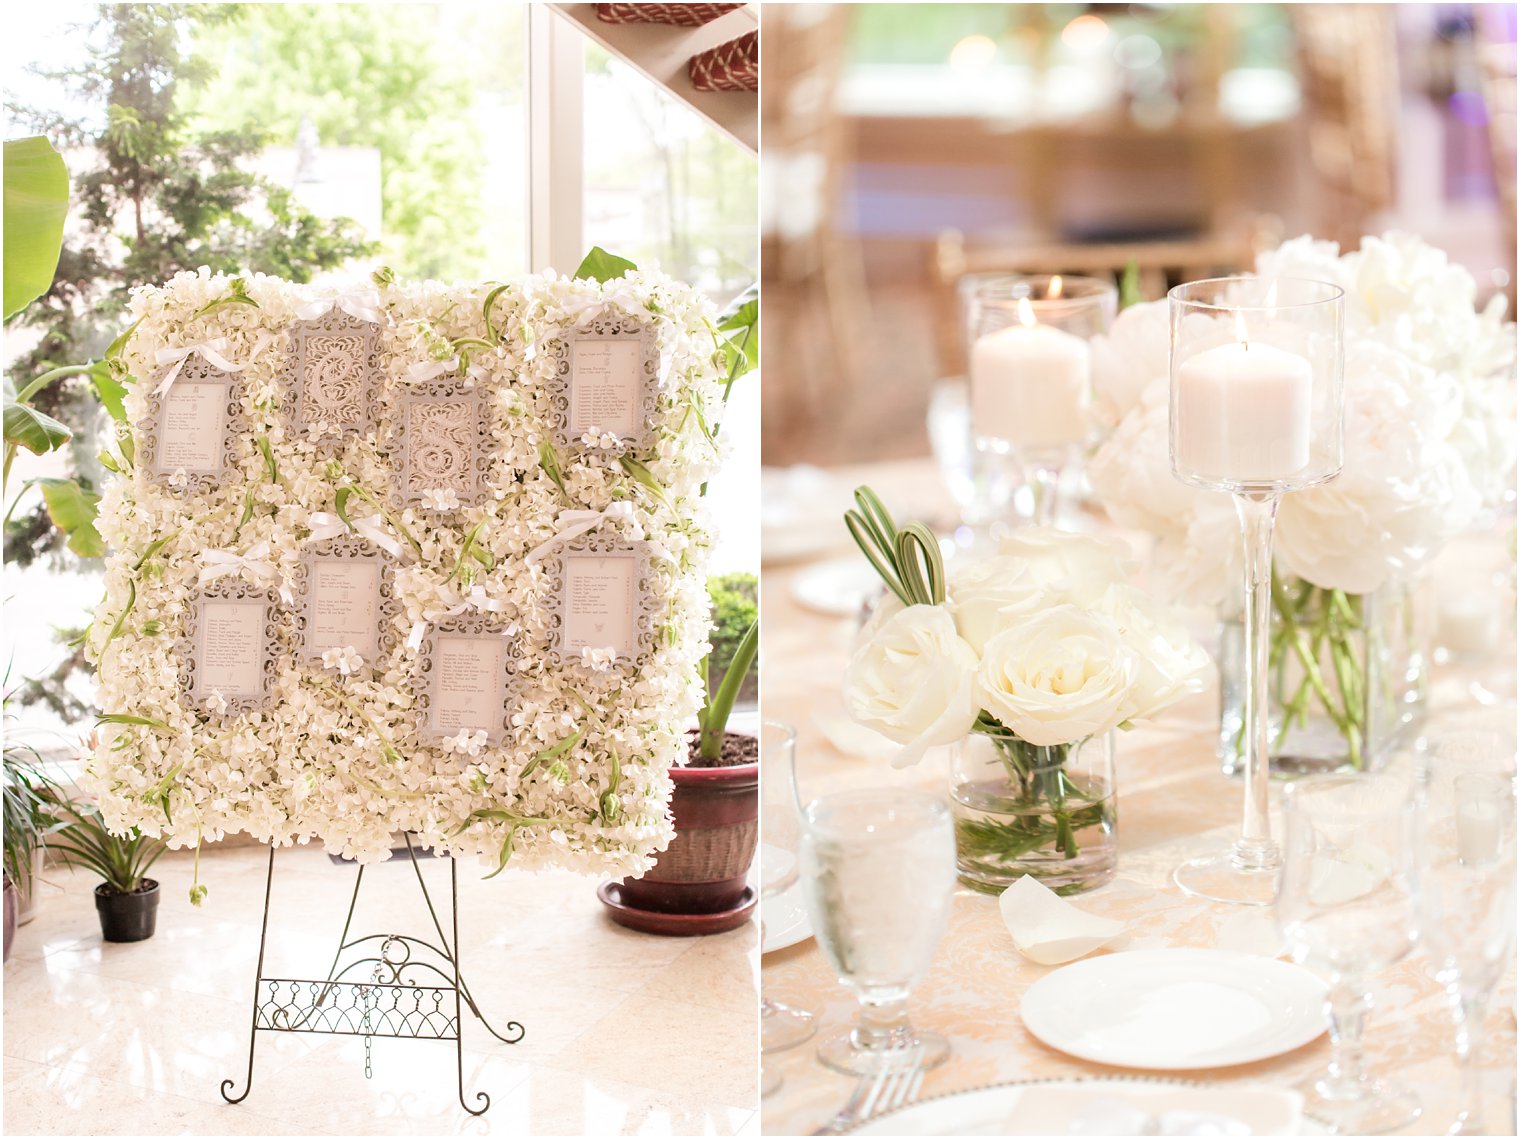 Seating cards by You-Niquely Adriana